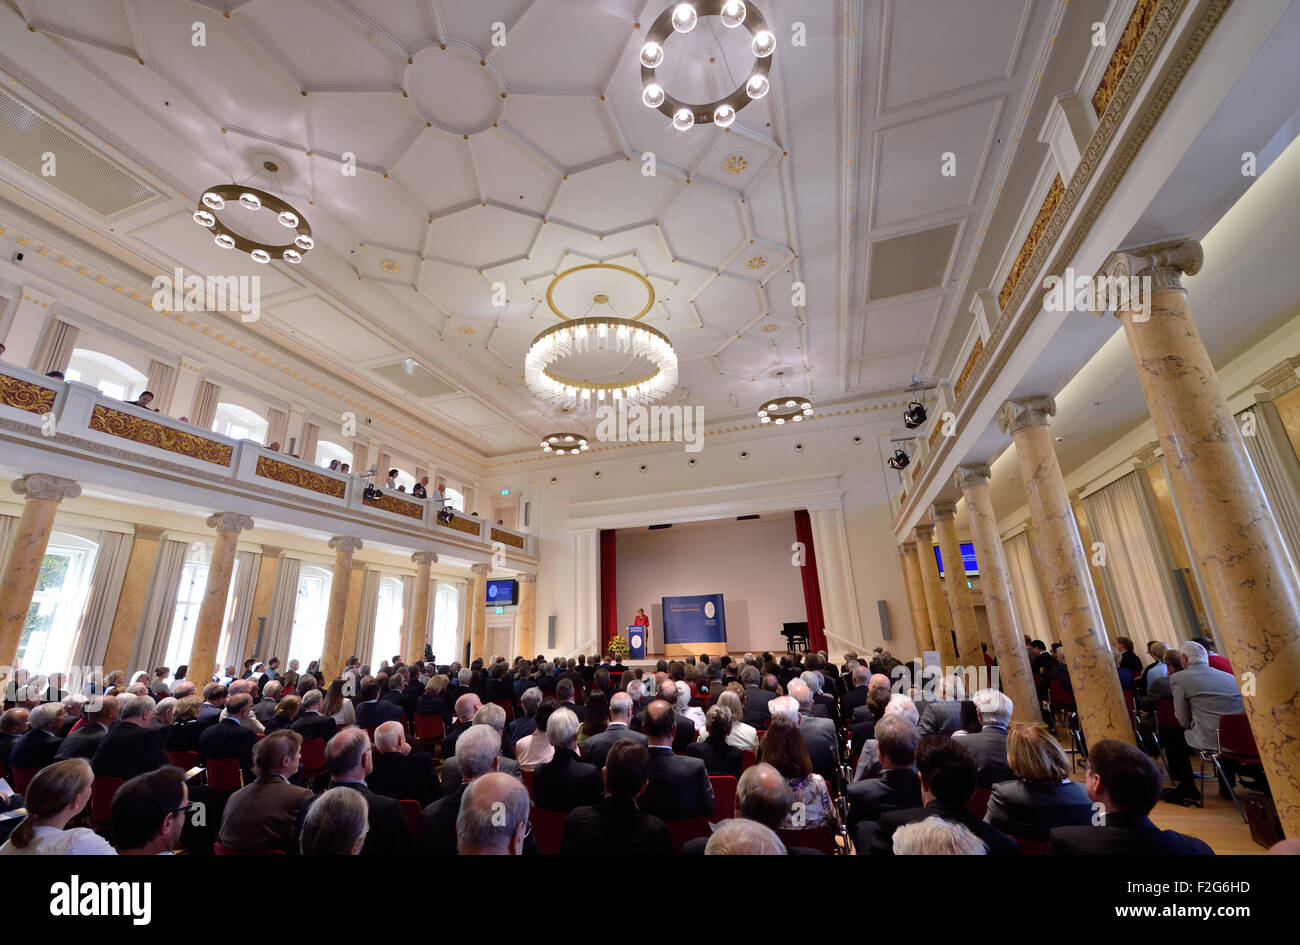 Halle, Germany. 18th Sep, 2015. German Chancellor (CDU) Angela Merkel gives a key note address at the annual meeting being held at the Leopoldina German National Academy for Sciences in Halle, Germany, 18 September 2015. The event this year is being held under the title 'Symmetry and asymmetry in science and art' Photo: HENDRIK SCHMIDT/DPA/Alamy Live News Stock Photo